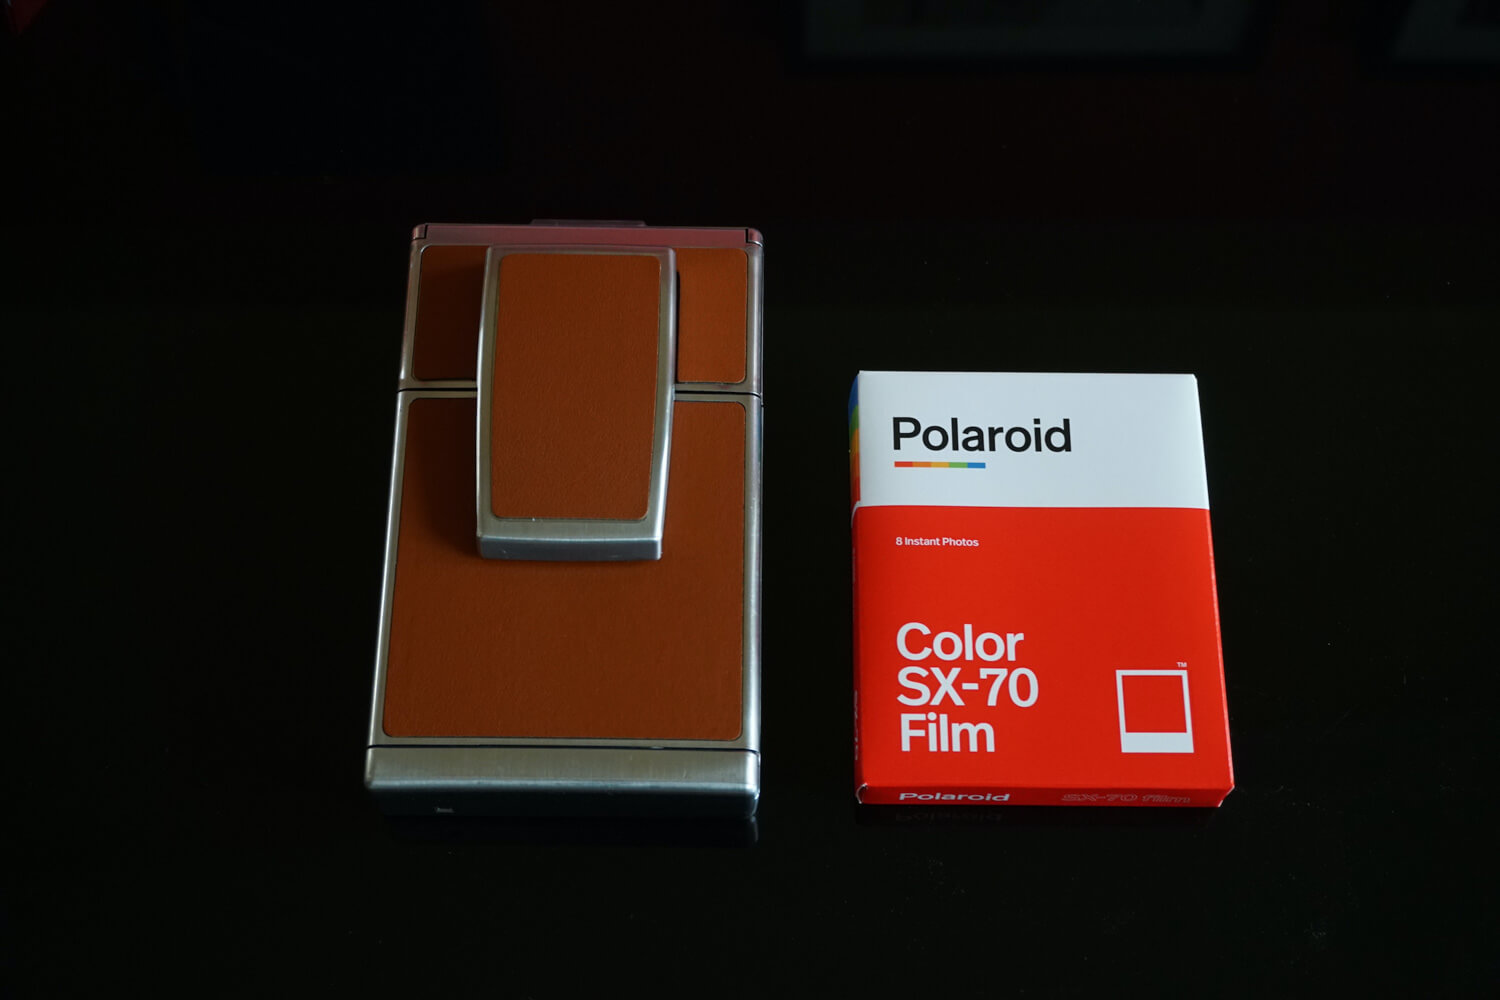 My Polaroid SX-70 and a pack of Color Film - George Pavlopoulos